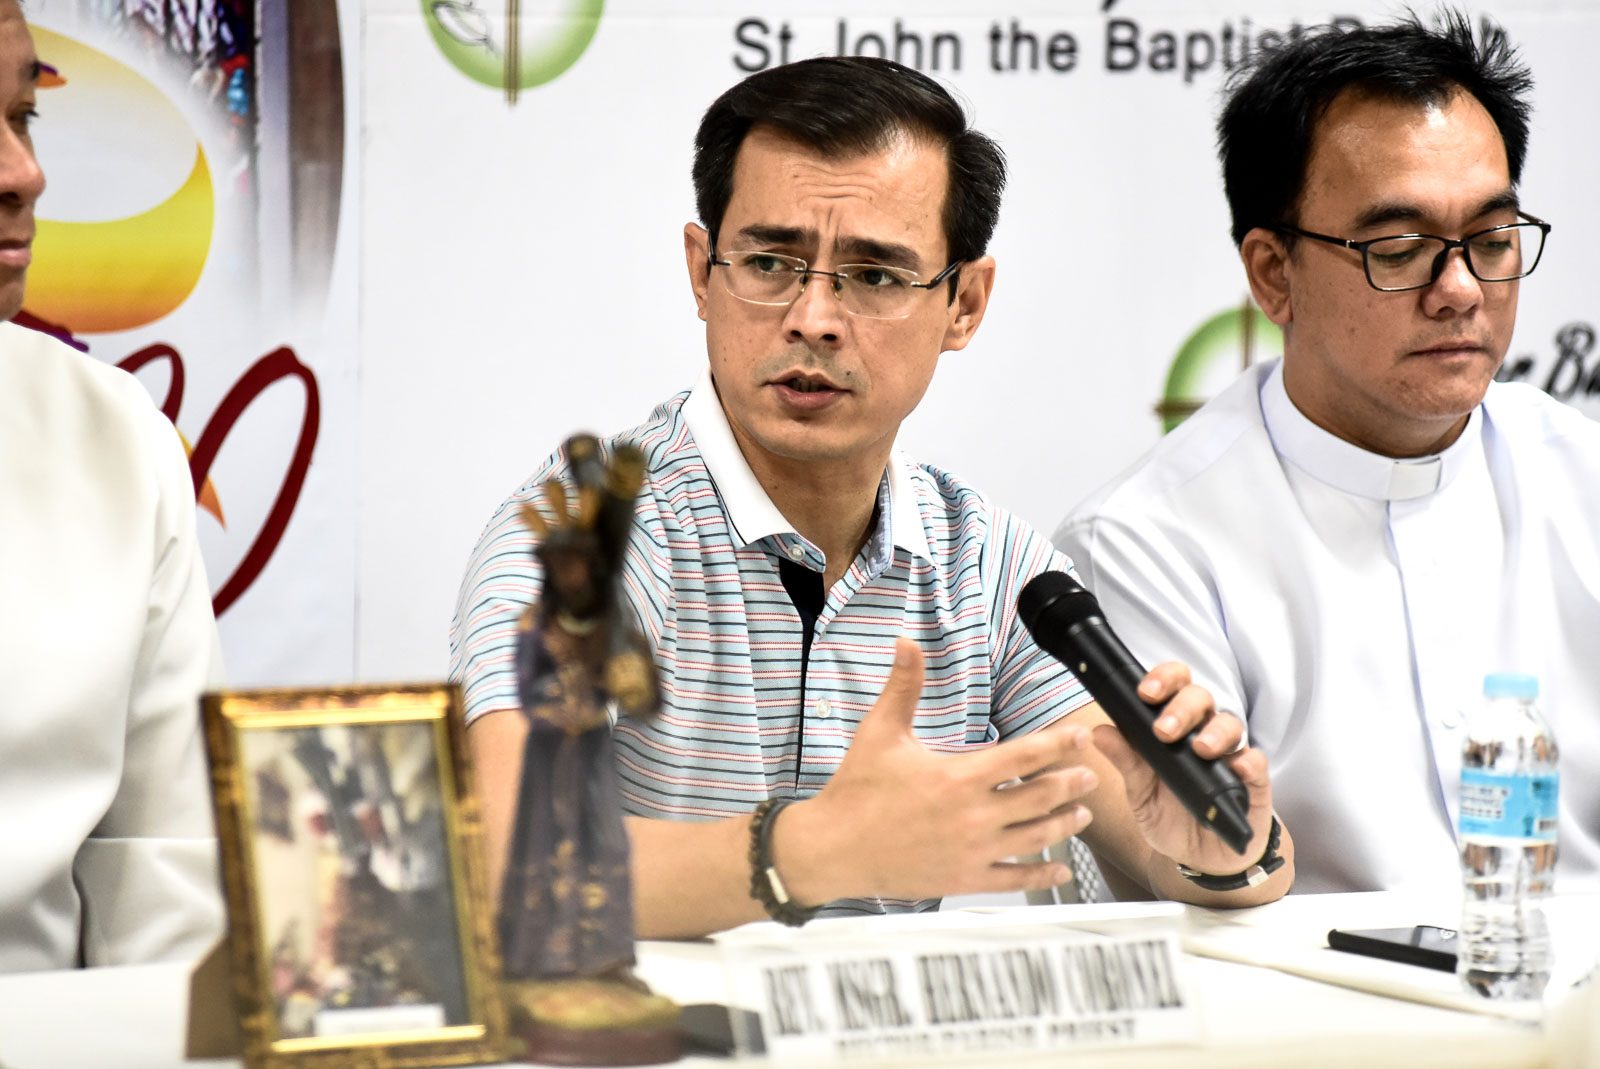 Twitter users slam Isko Moreno for clearing Quiapo streets of vendors for Traslacion 2020